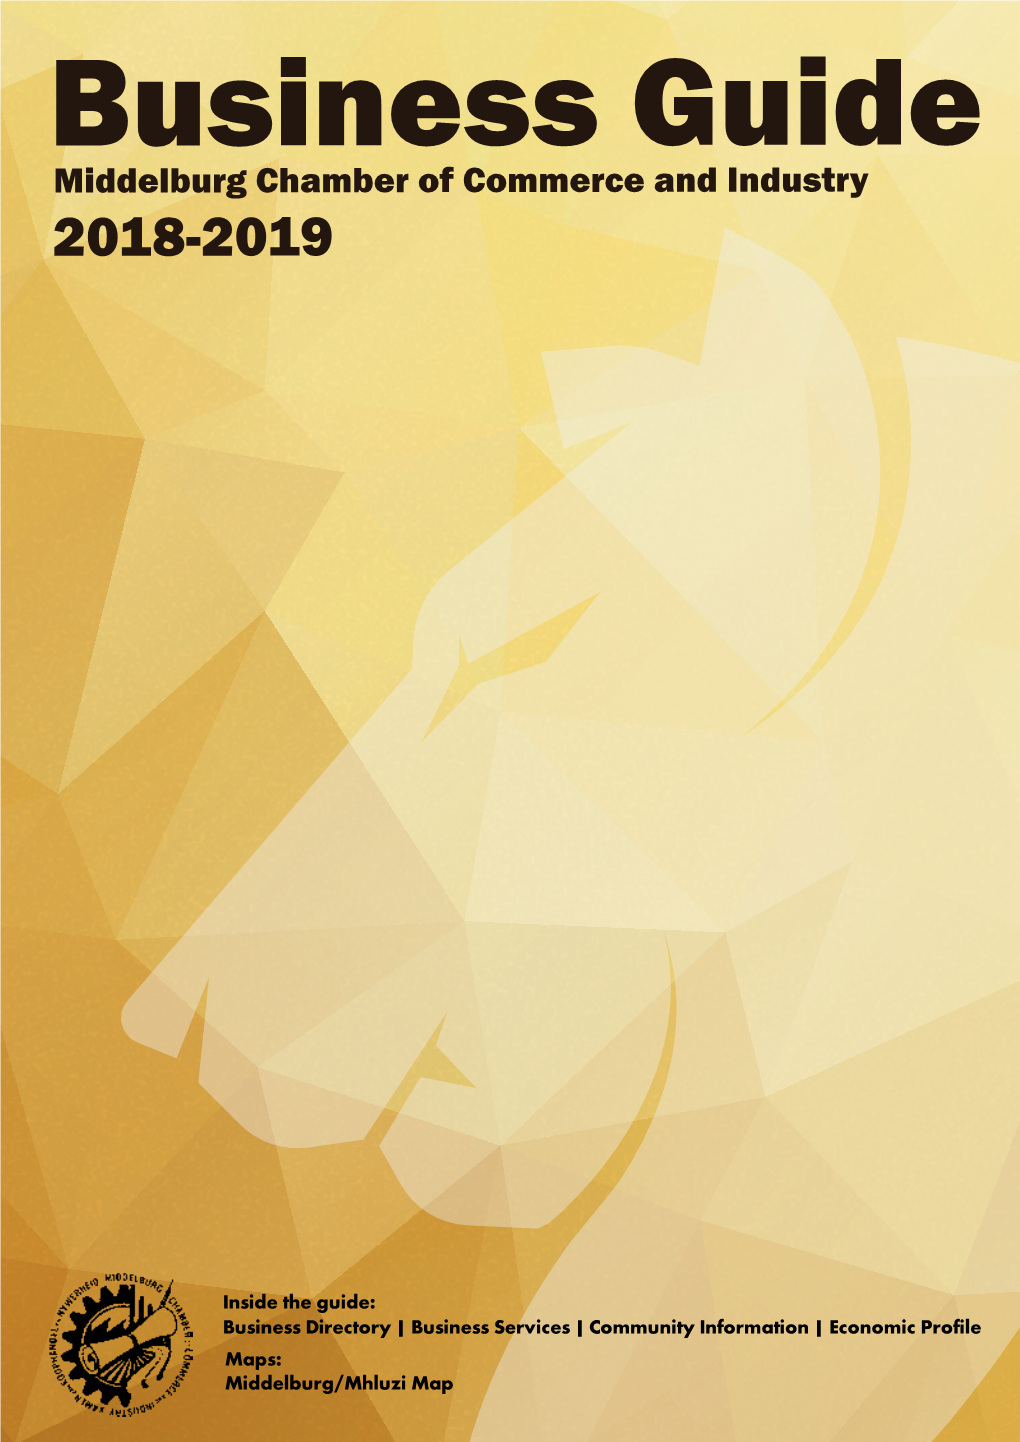 Business Guide Middelburg Chamber of Commerce and Industry 2018-2019